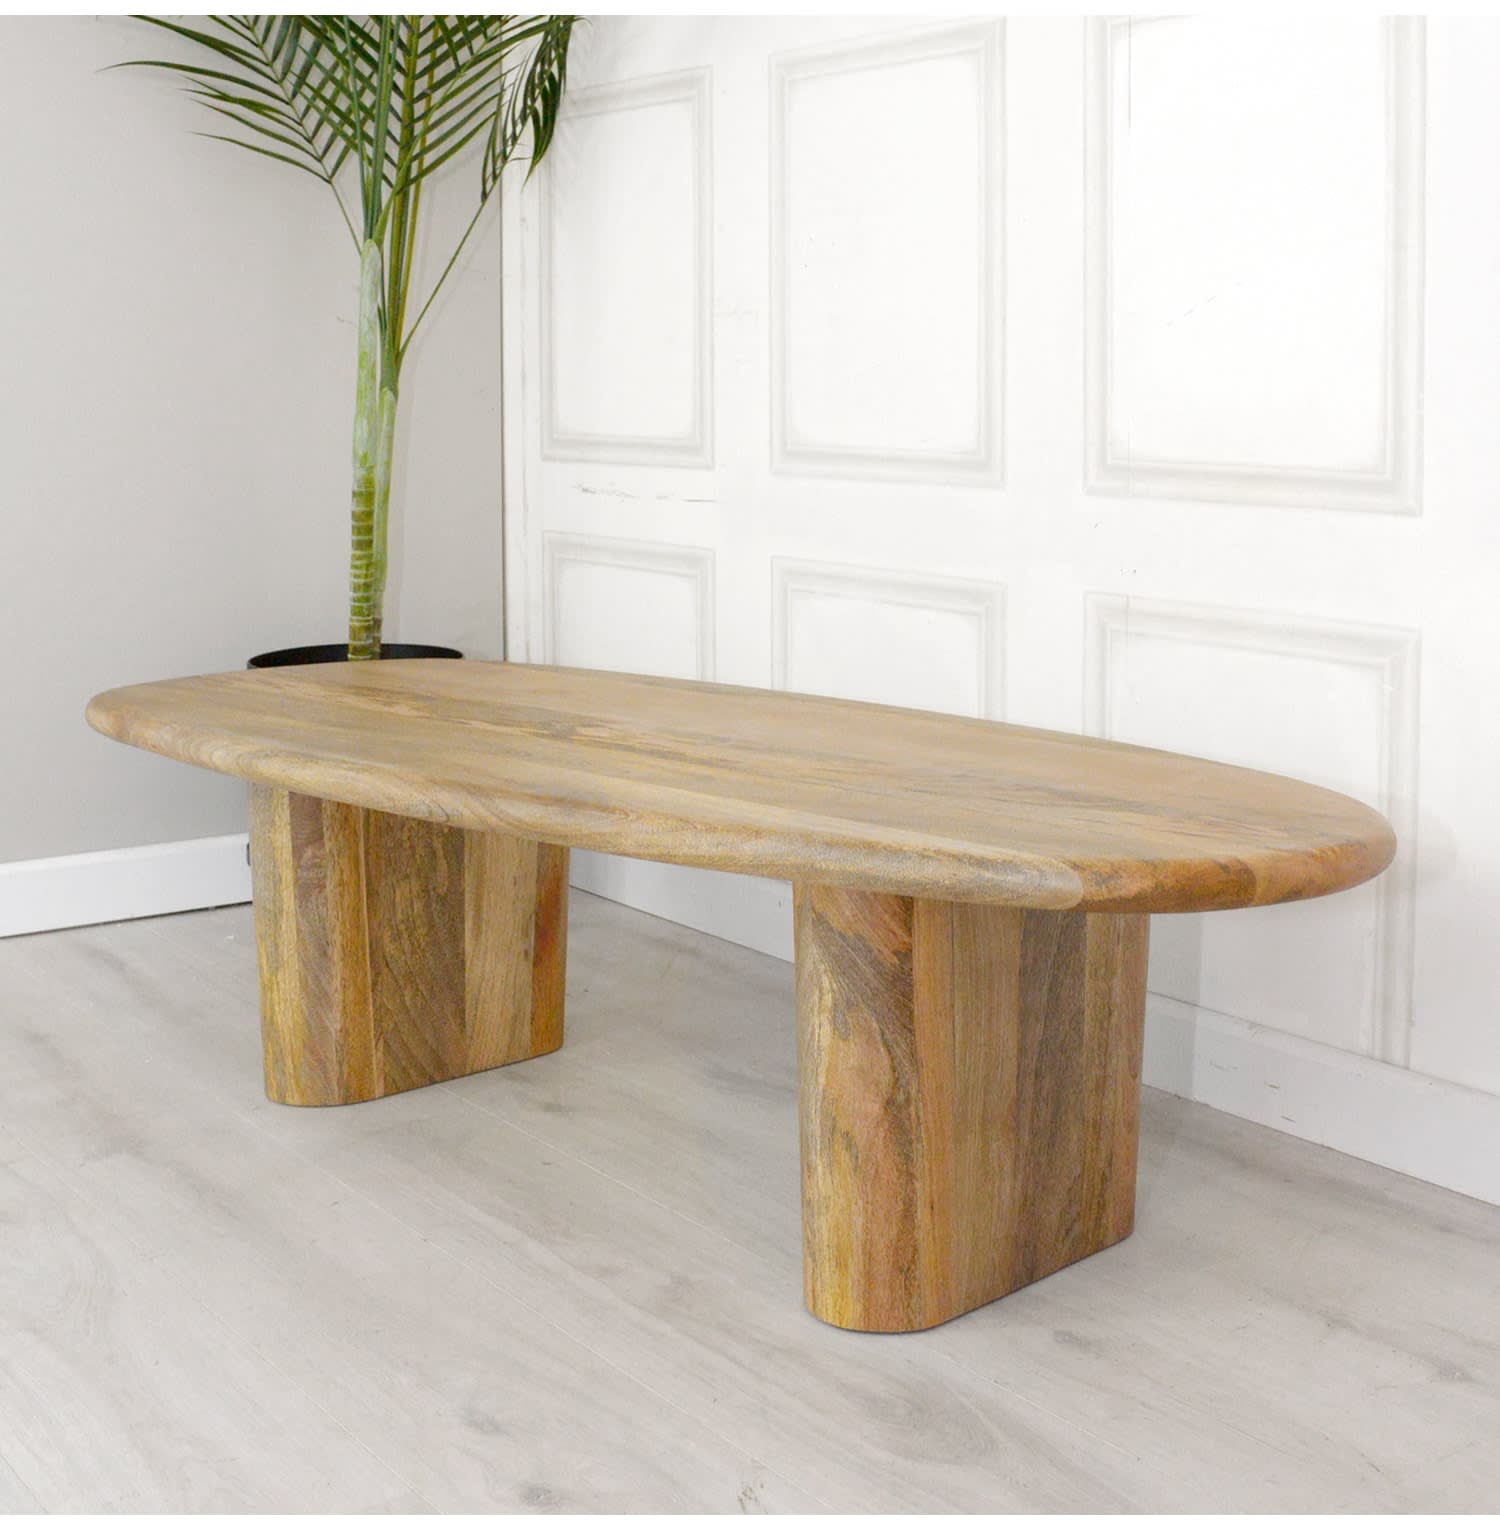 Hoffman Wooden Coffee Table by Gallery Direct